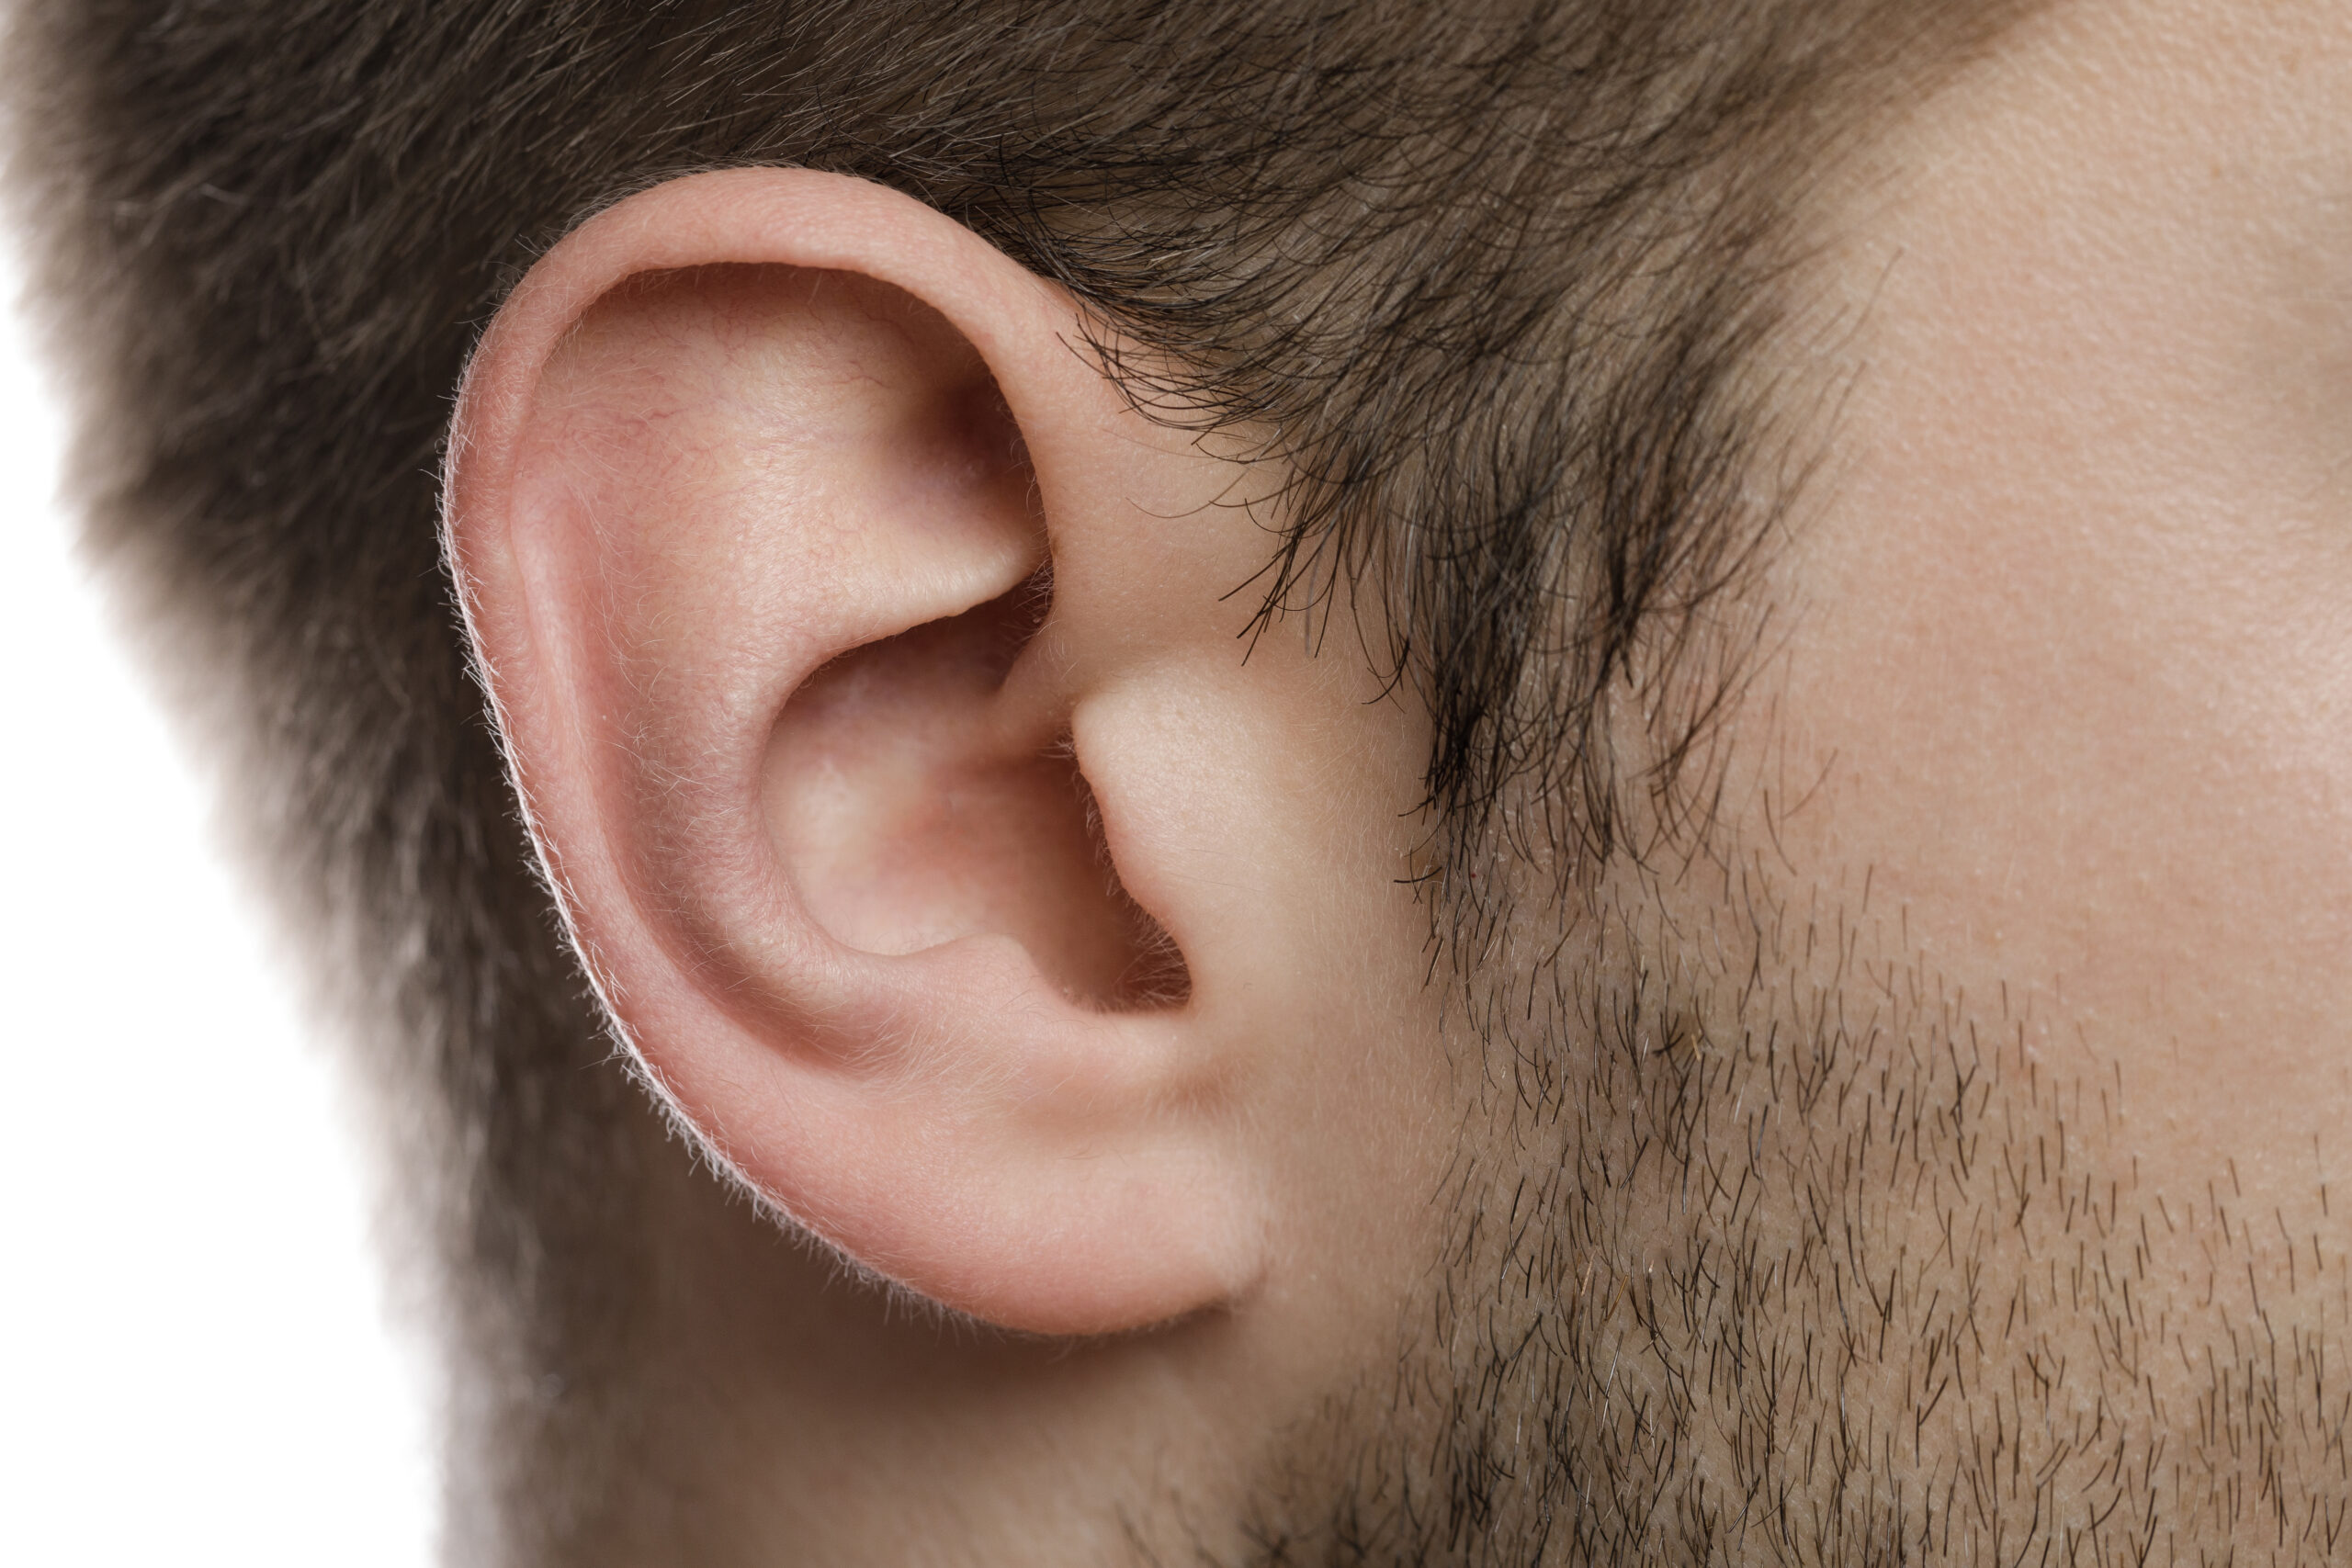 Man bites off colleague's earlobe while drunk, sentenced to 5 months in jail